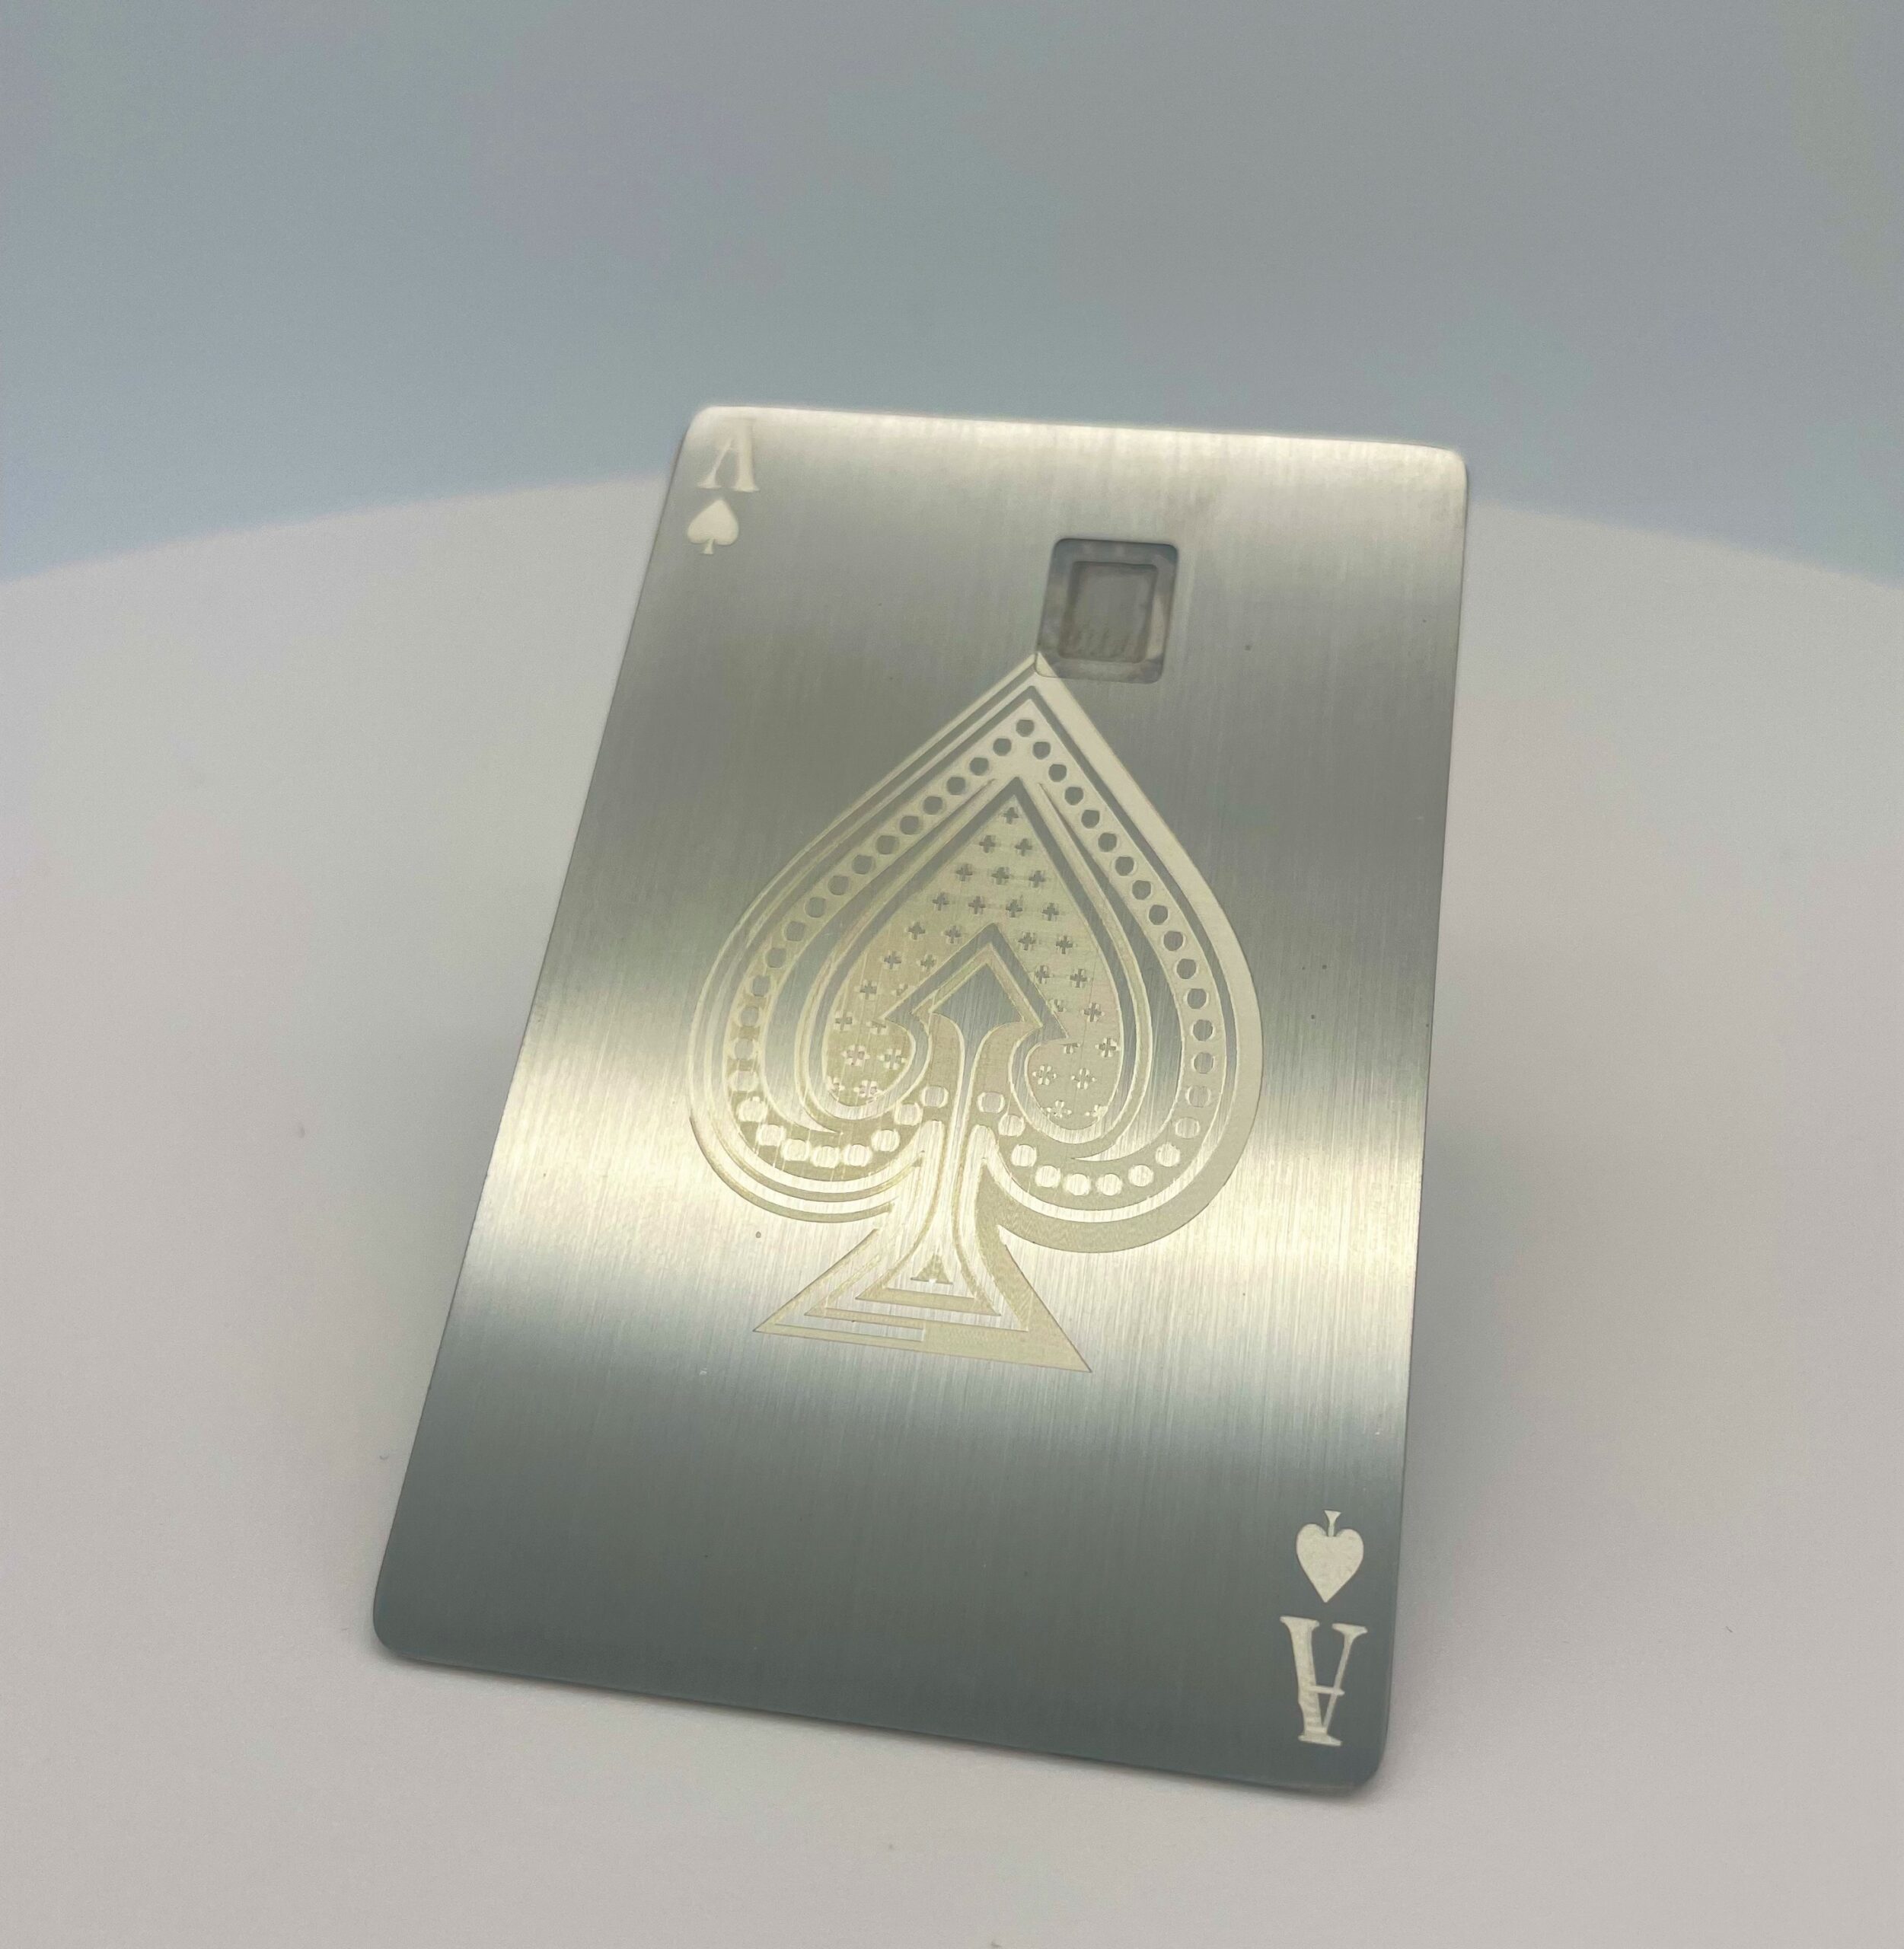 Credit Card Skin ace of Spades 